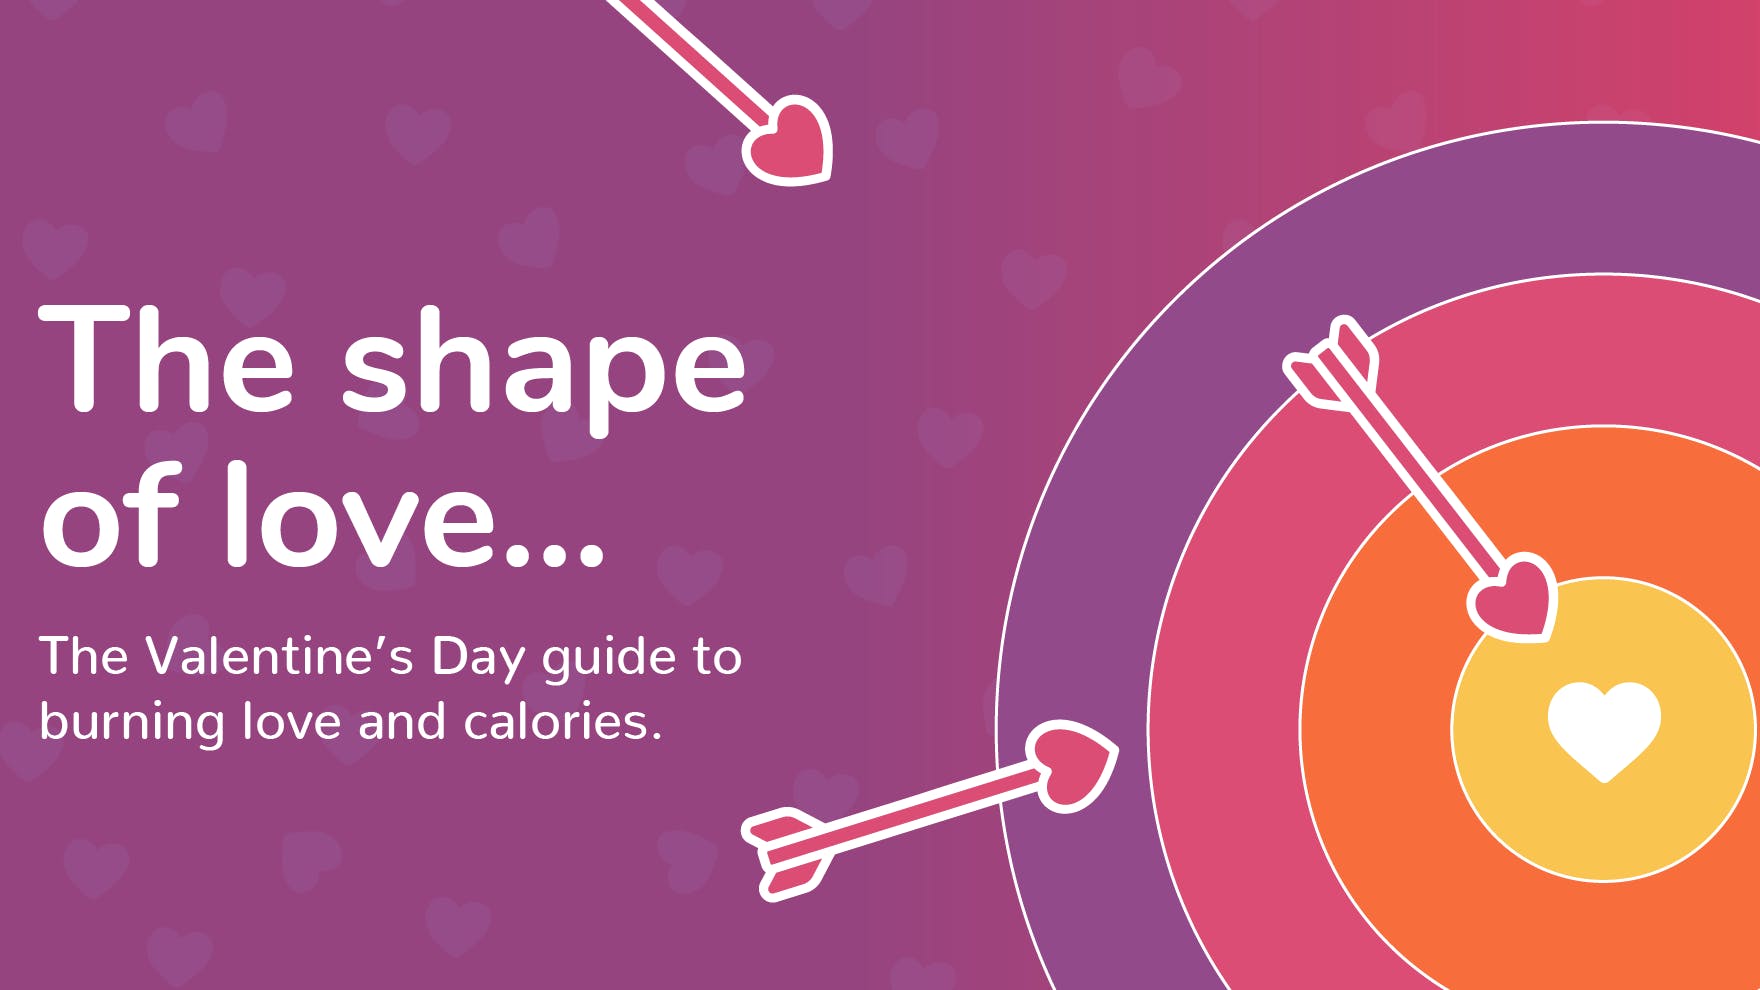 Graphic for the header of the shape of love guide